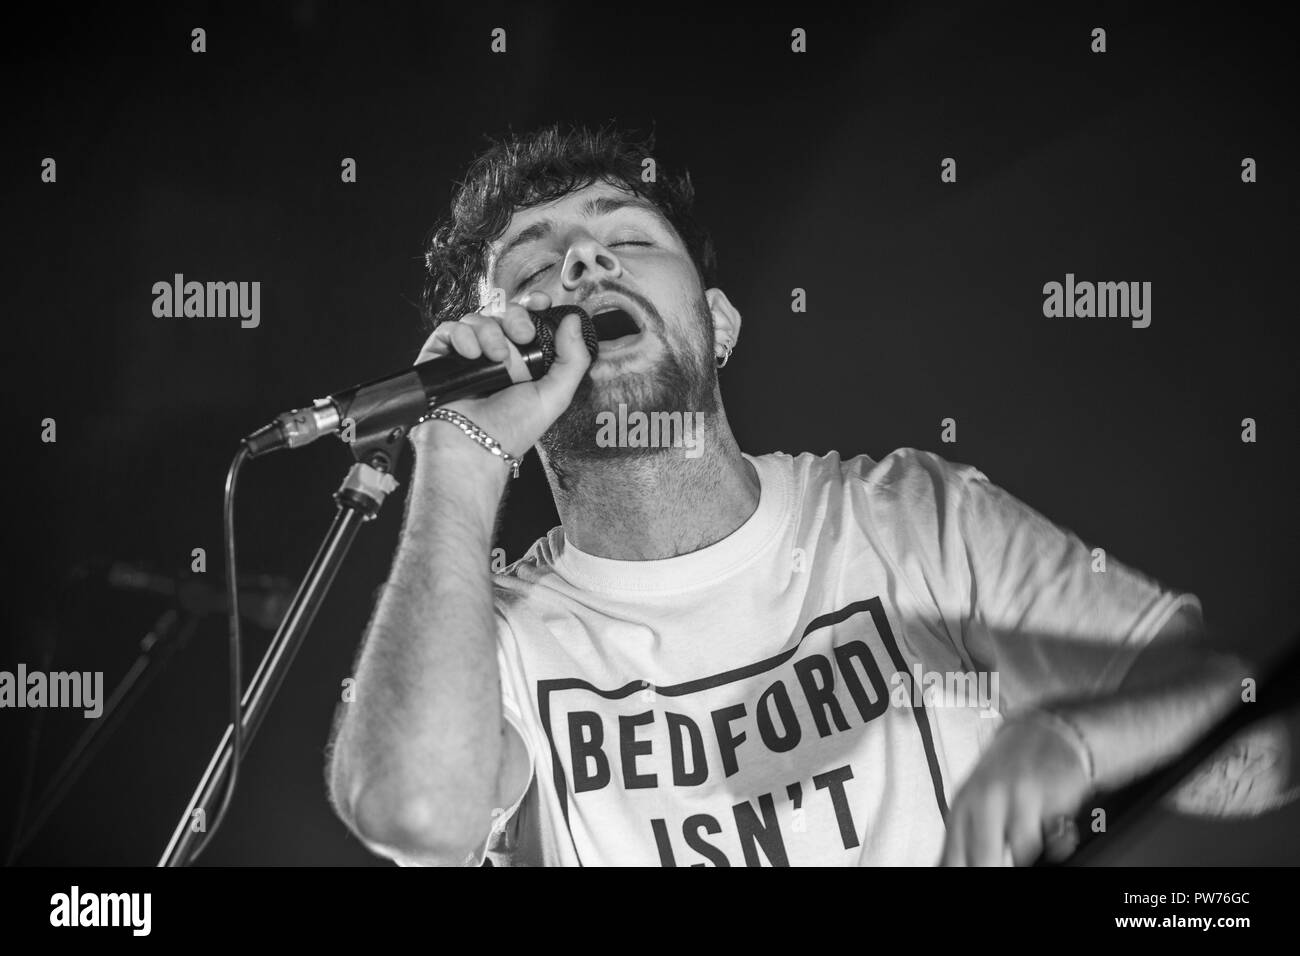 Tom Grennan at a small gig in hometown Bedford 2017 Stock Photo